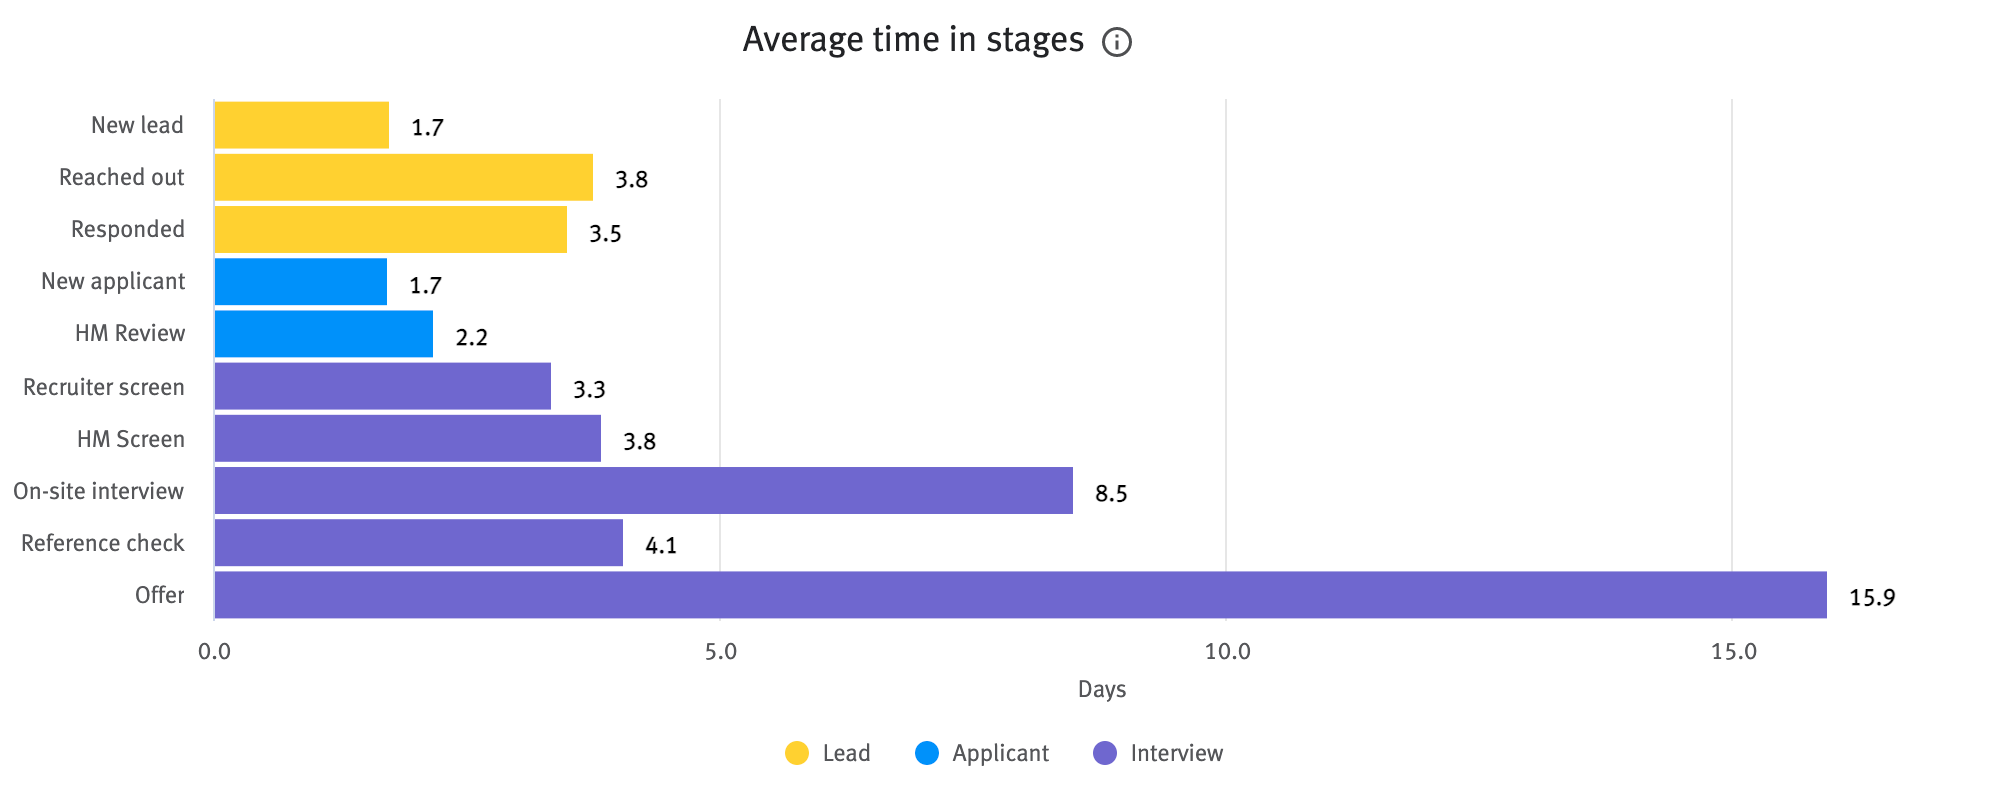 Average time in stages chart